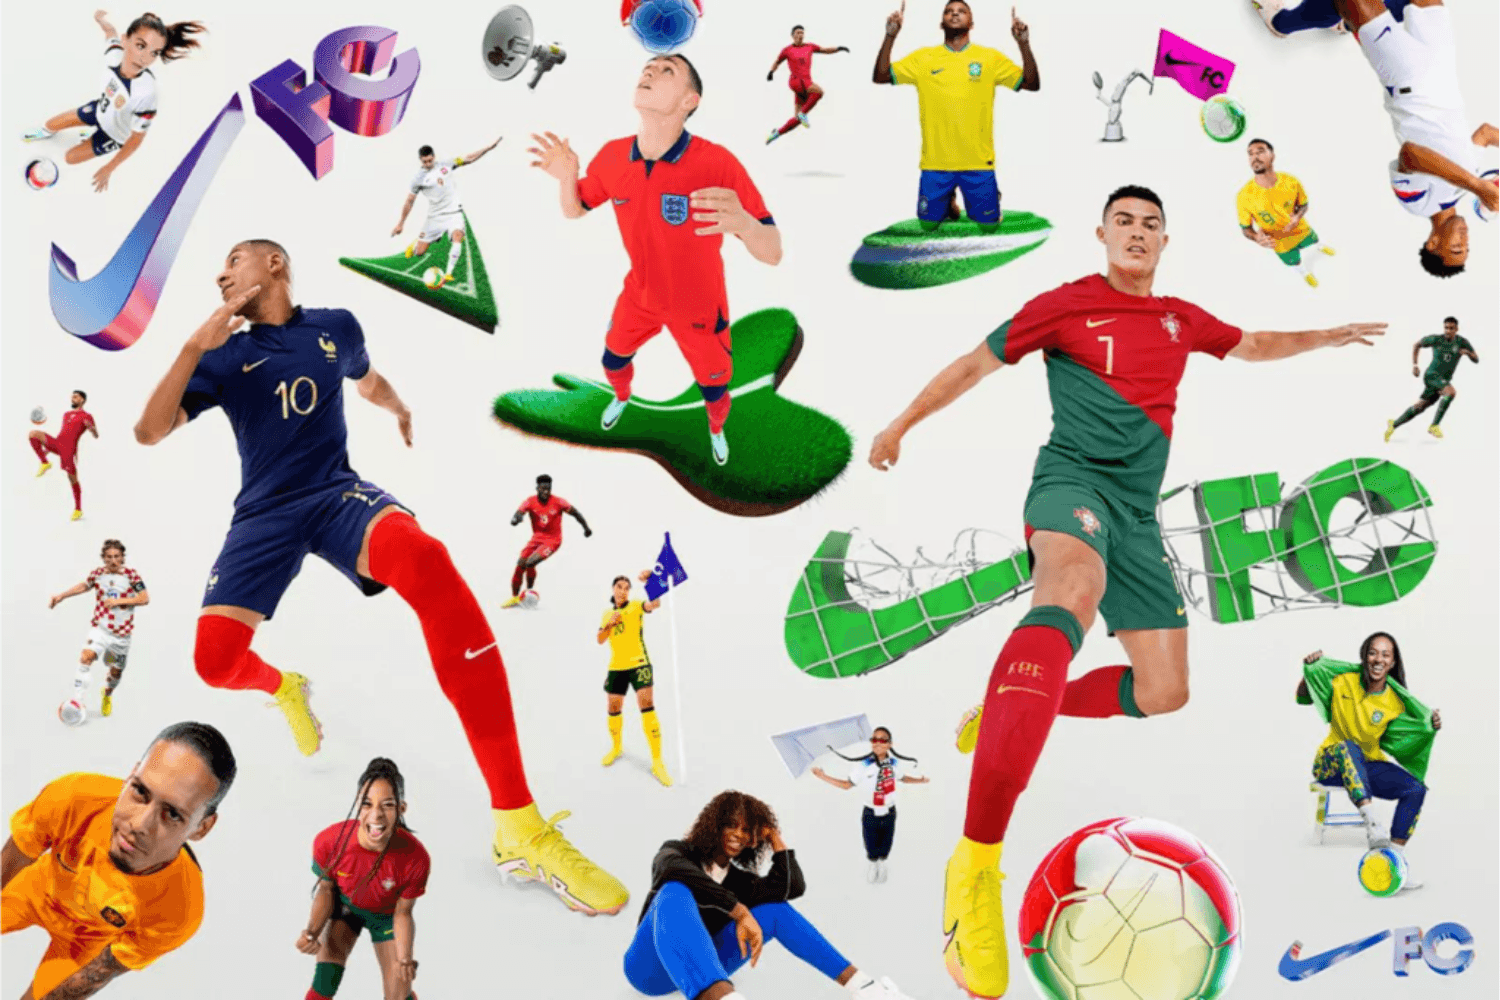 Support your team with Nike's World Cup football kits